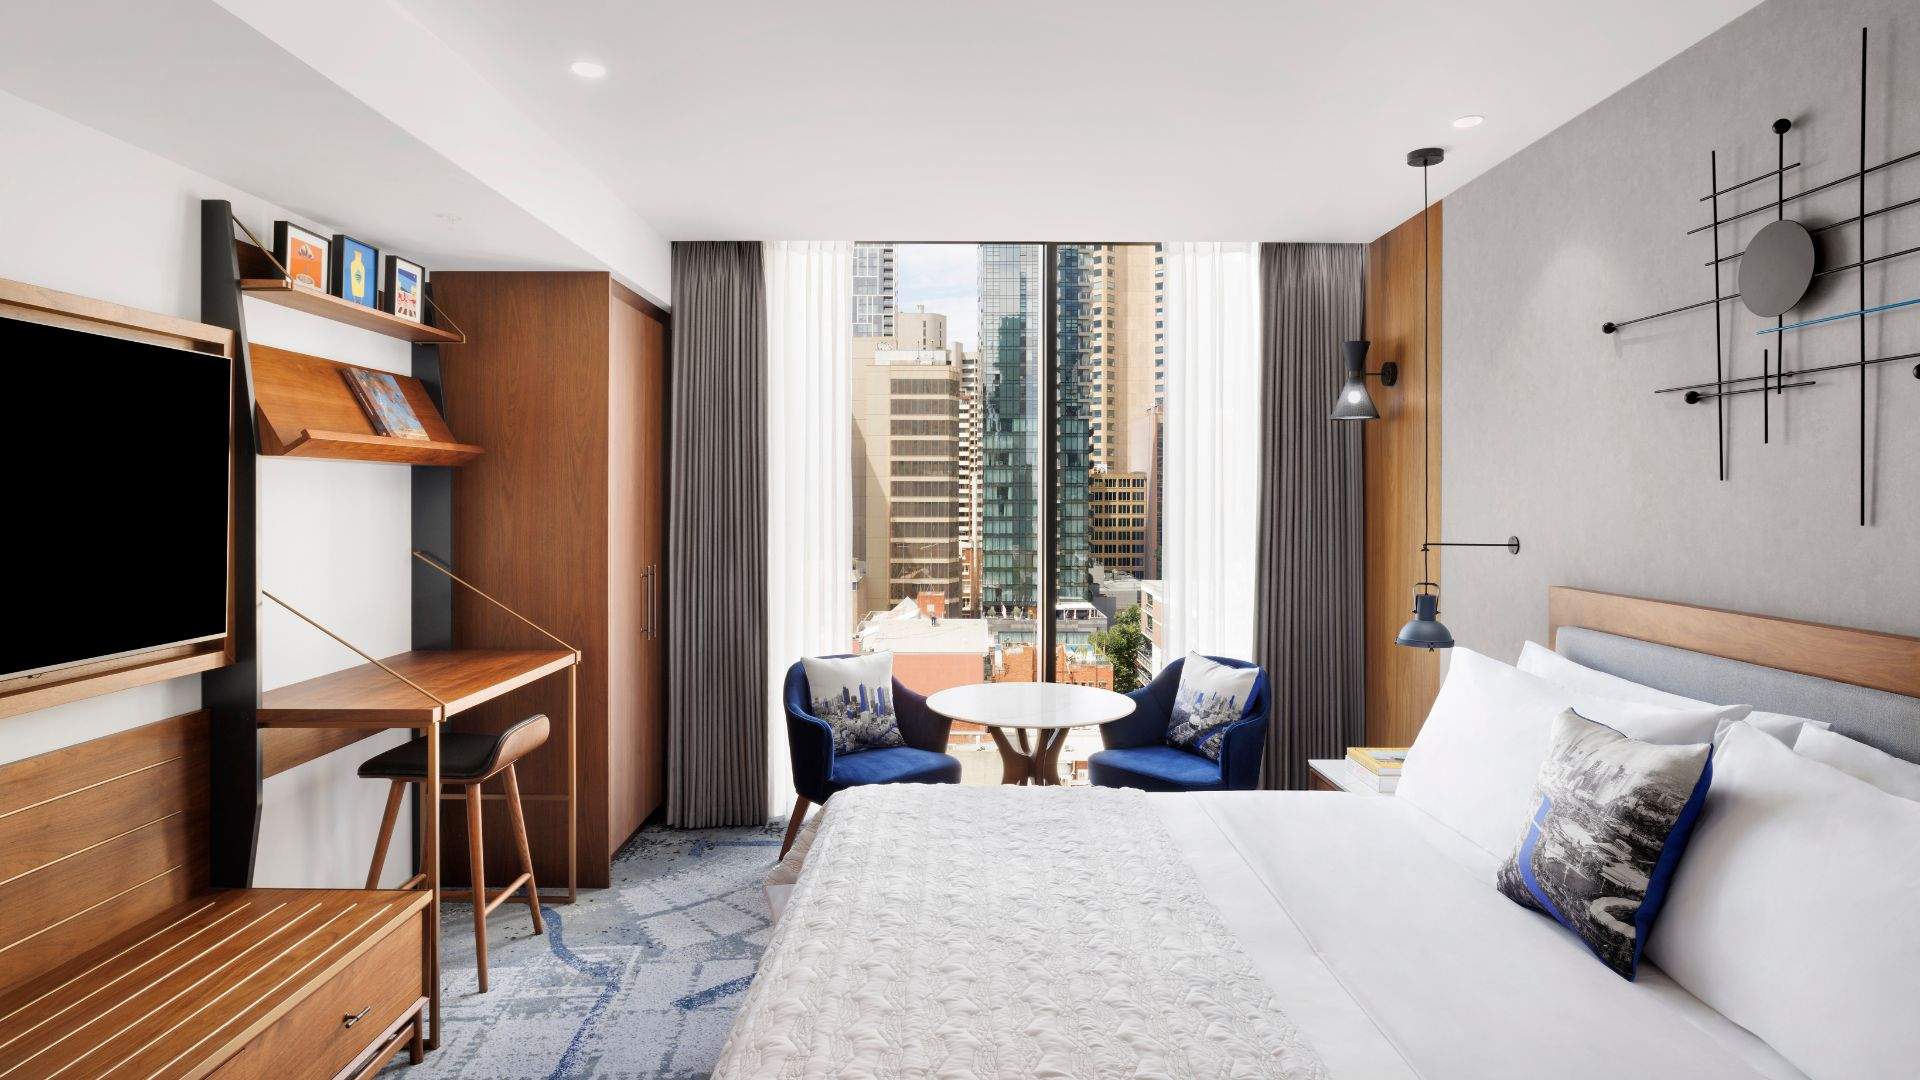 Three Fancy New Hotels to Check Out If You're Looking for a Chic Weekender in Melbourne